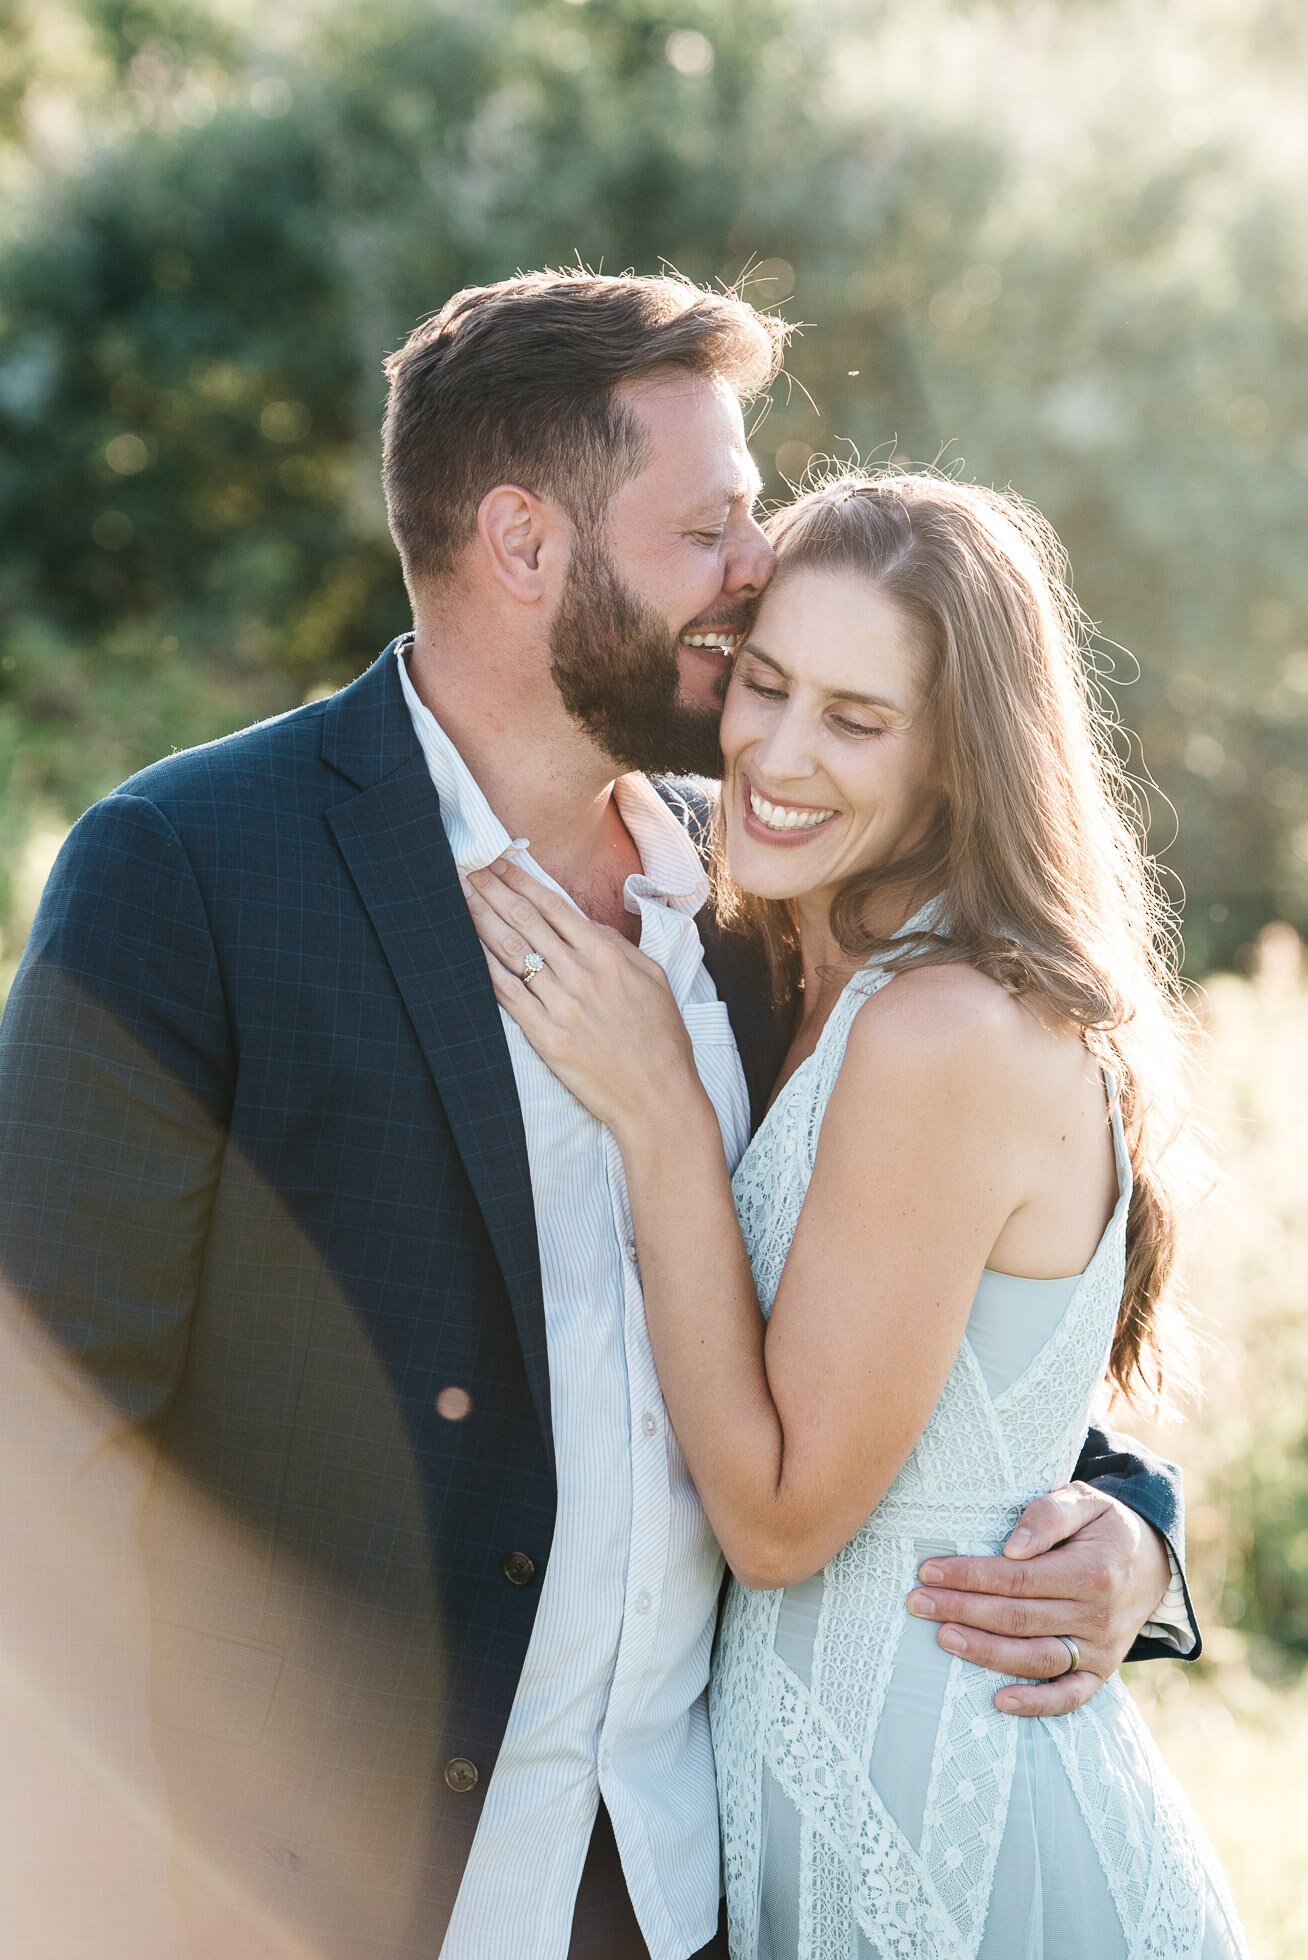 Golden Hour couple, Mariah Fisher Photography.jpg